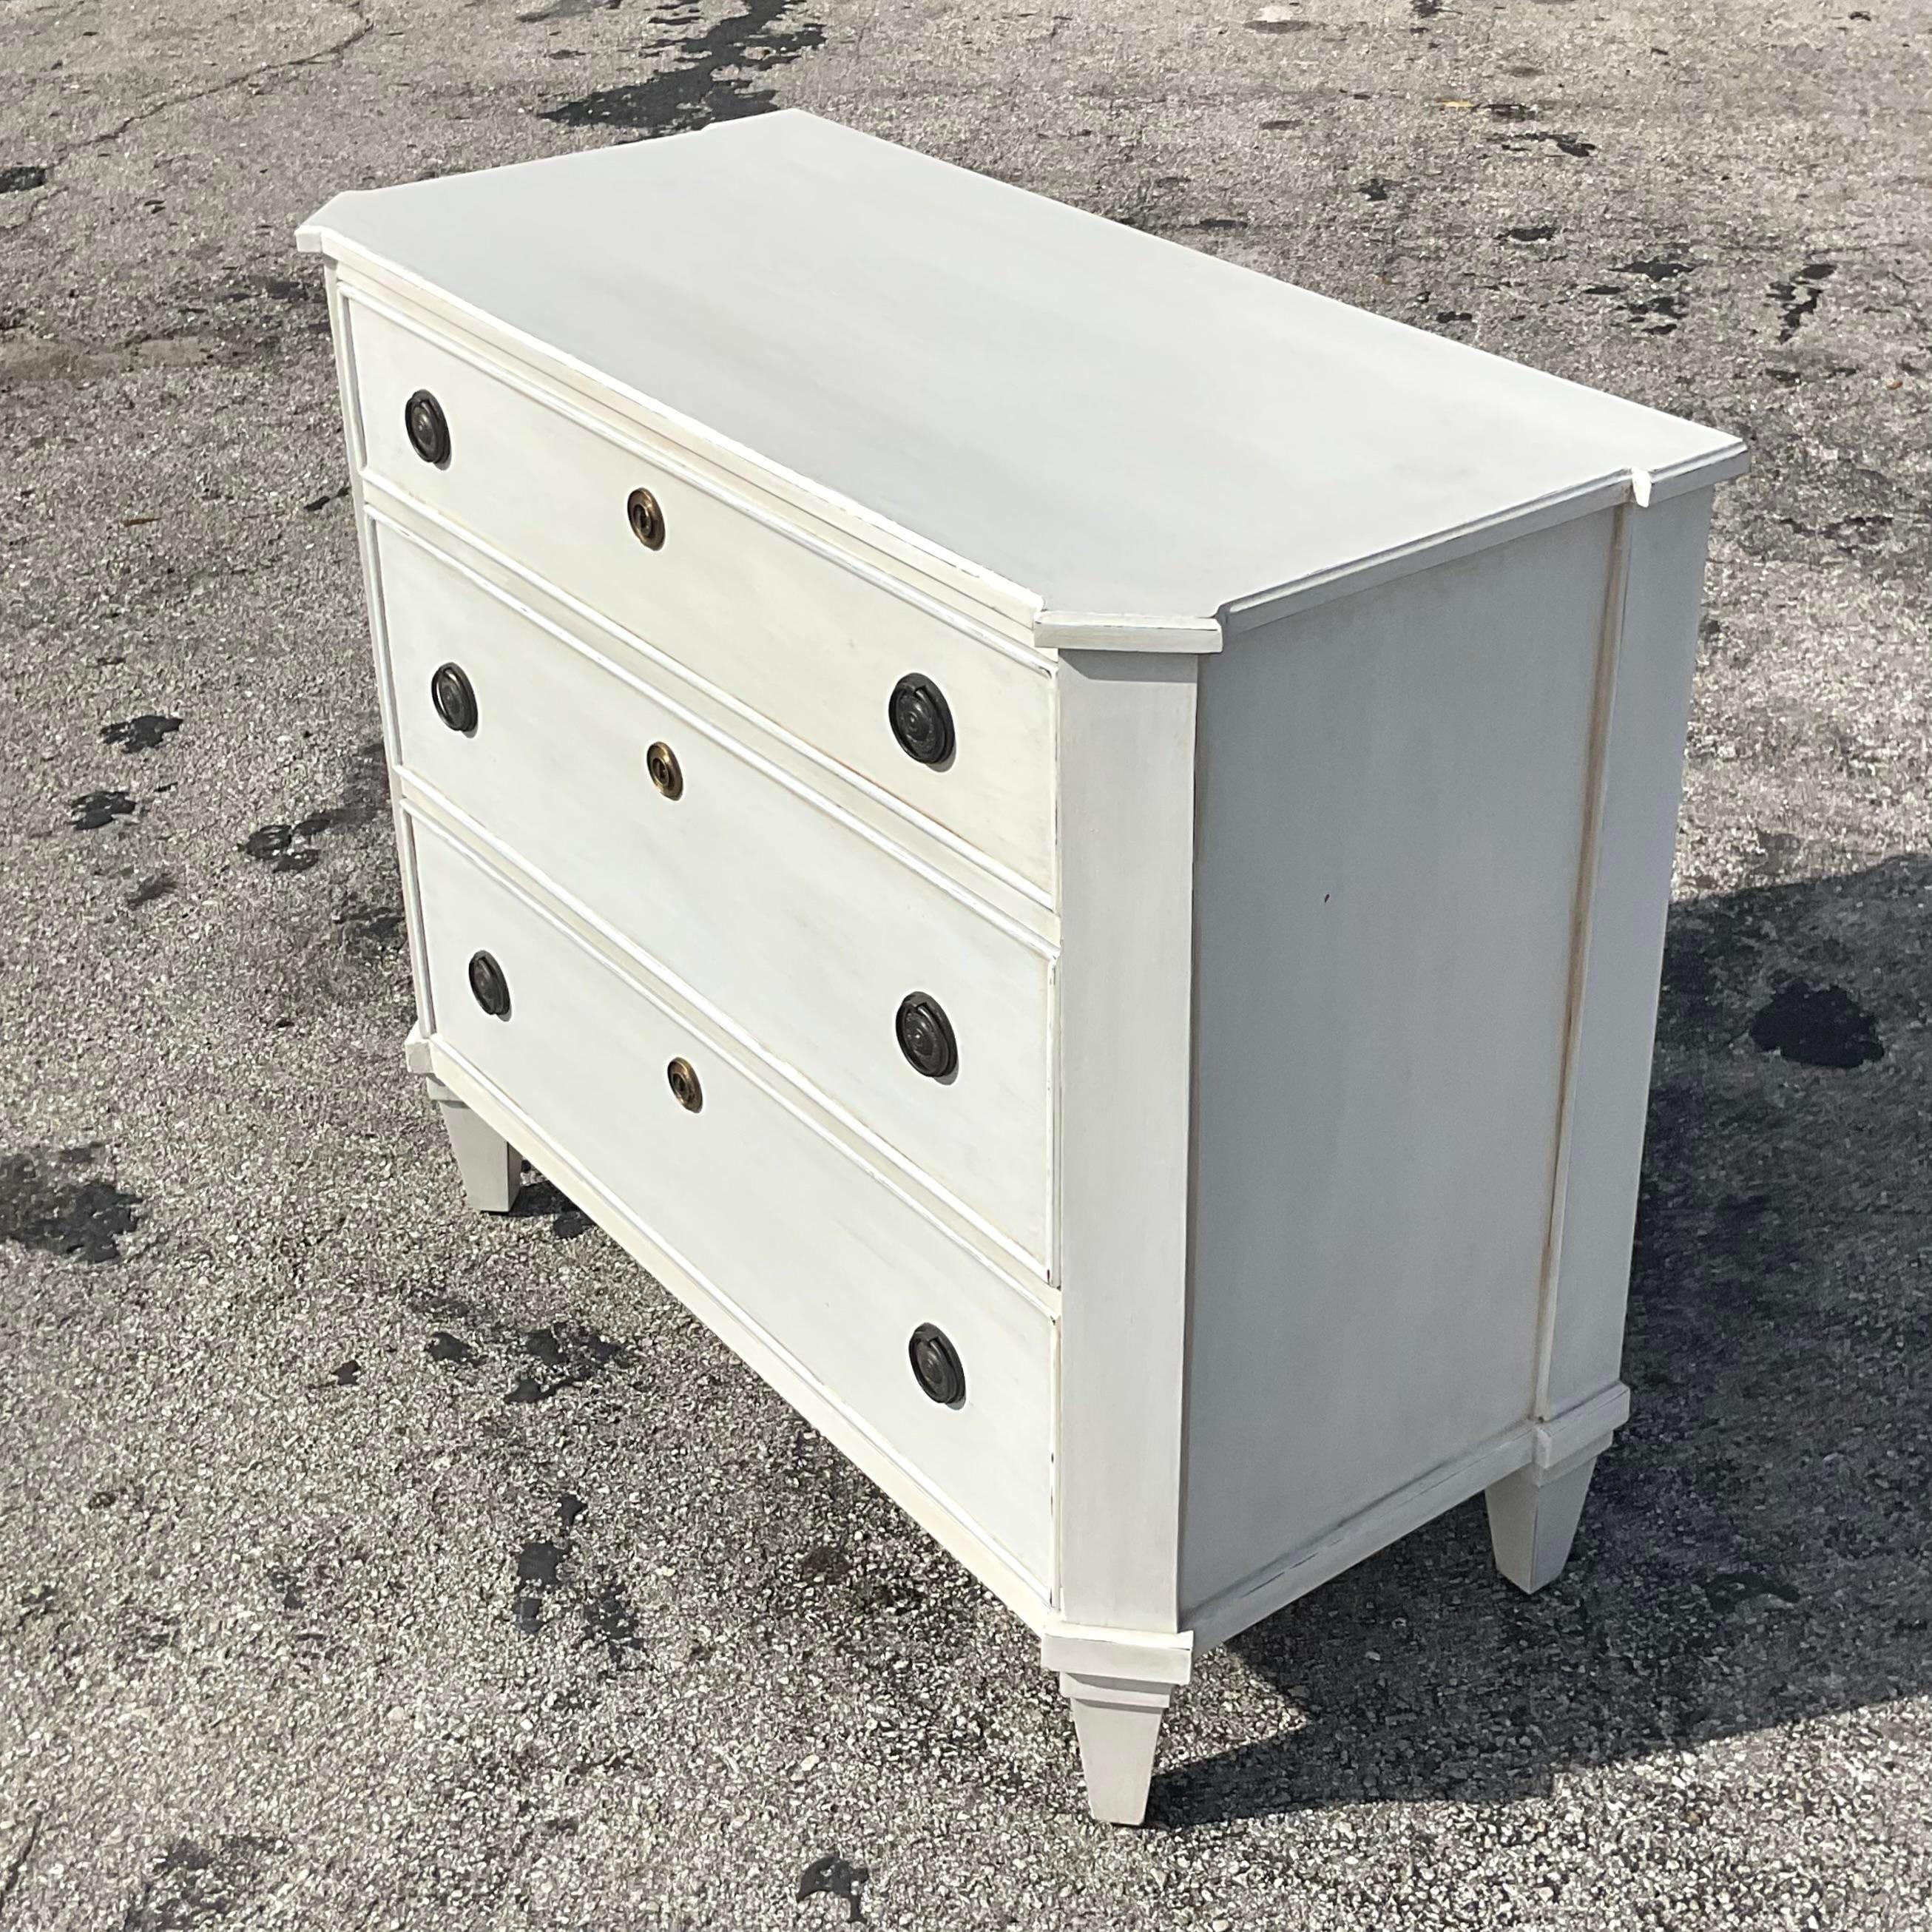 A stunning vintage Boho chest of drawers. A chic Gustavian style cabinet in an off white washed finish. Acquired from the collection of the iconic Designer Lars Bolander.